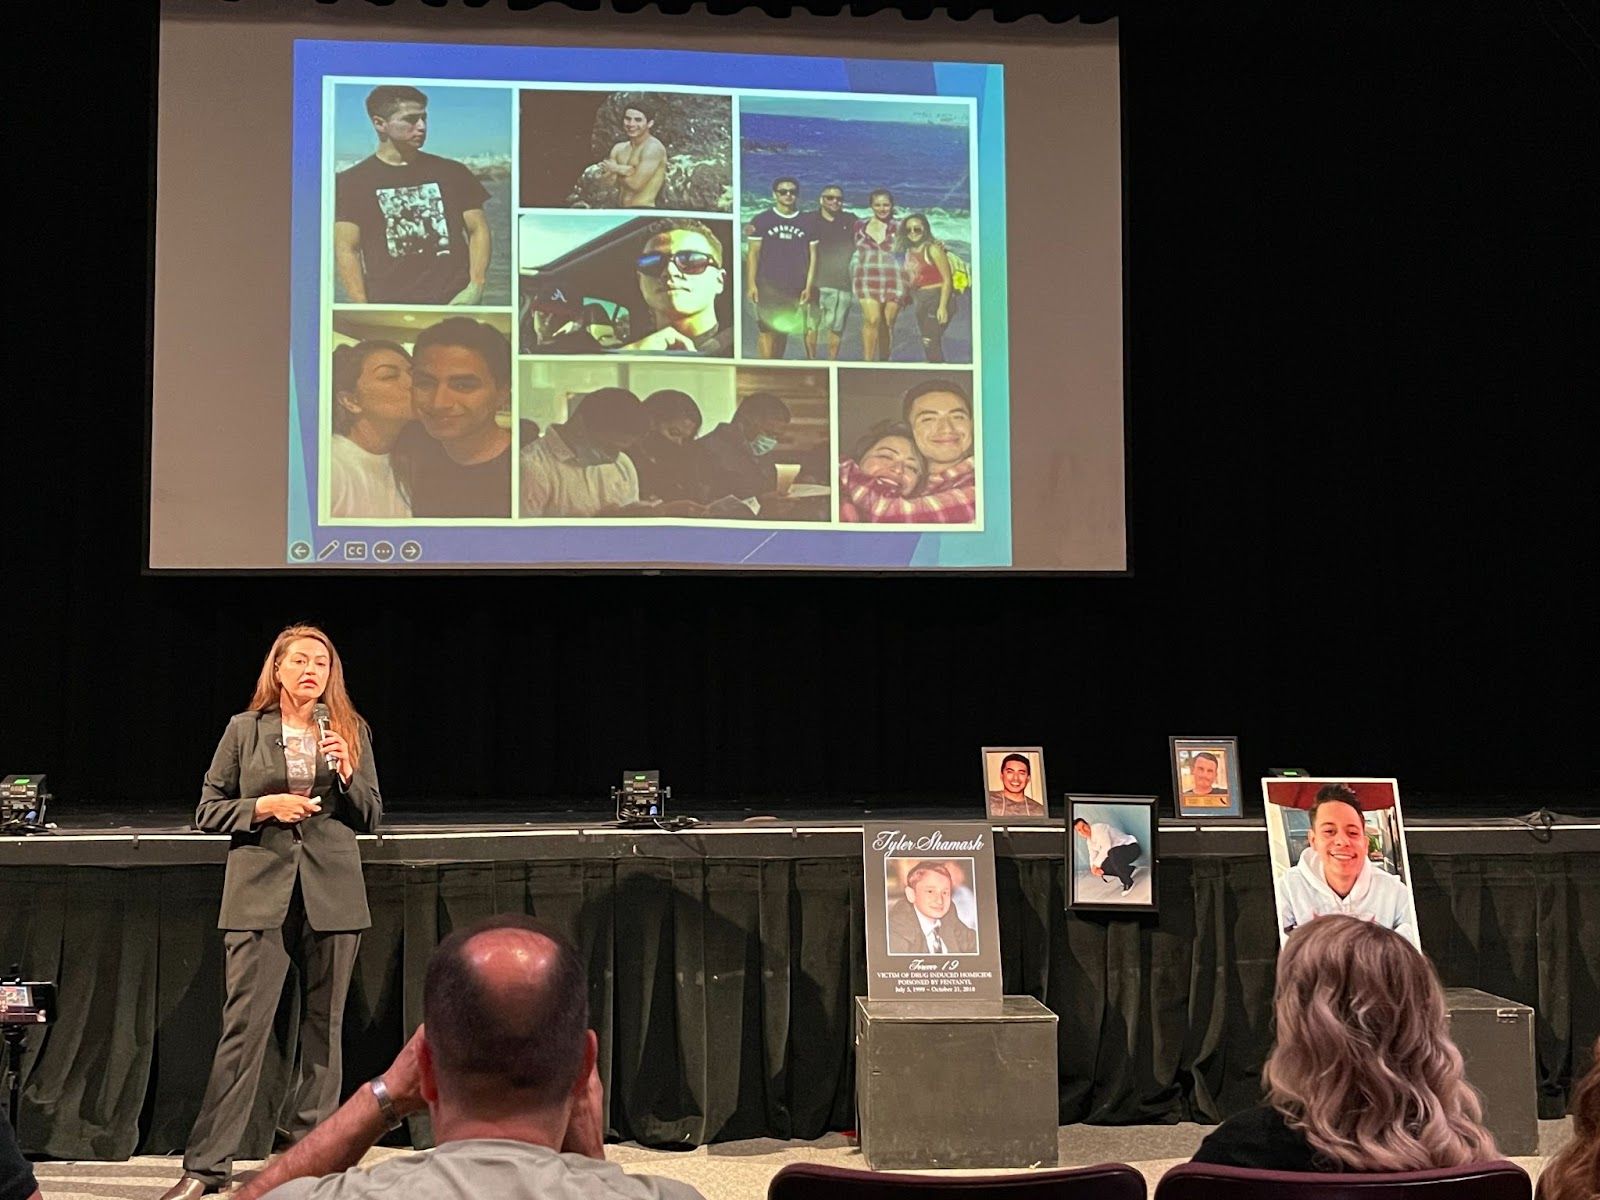 Perla Mendoza, founder of Project Eli, speaks to a crowd at Los Alamitos High School on April 24 about her 20-year-old son's death from taking one pill he thought was a prescription drug. The pill actually contained a lethal dose of the synthetic opioid fentanyl. Photo by David N. Young.